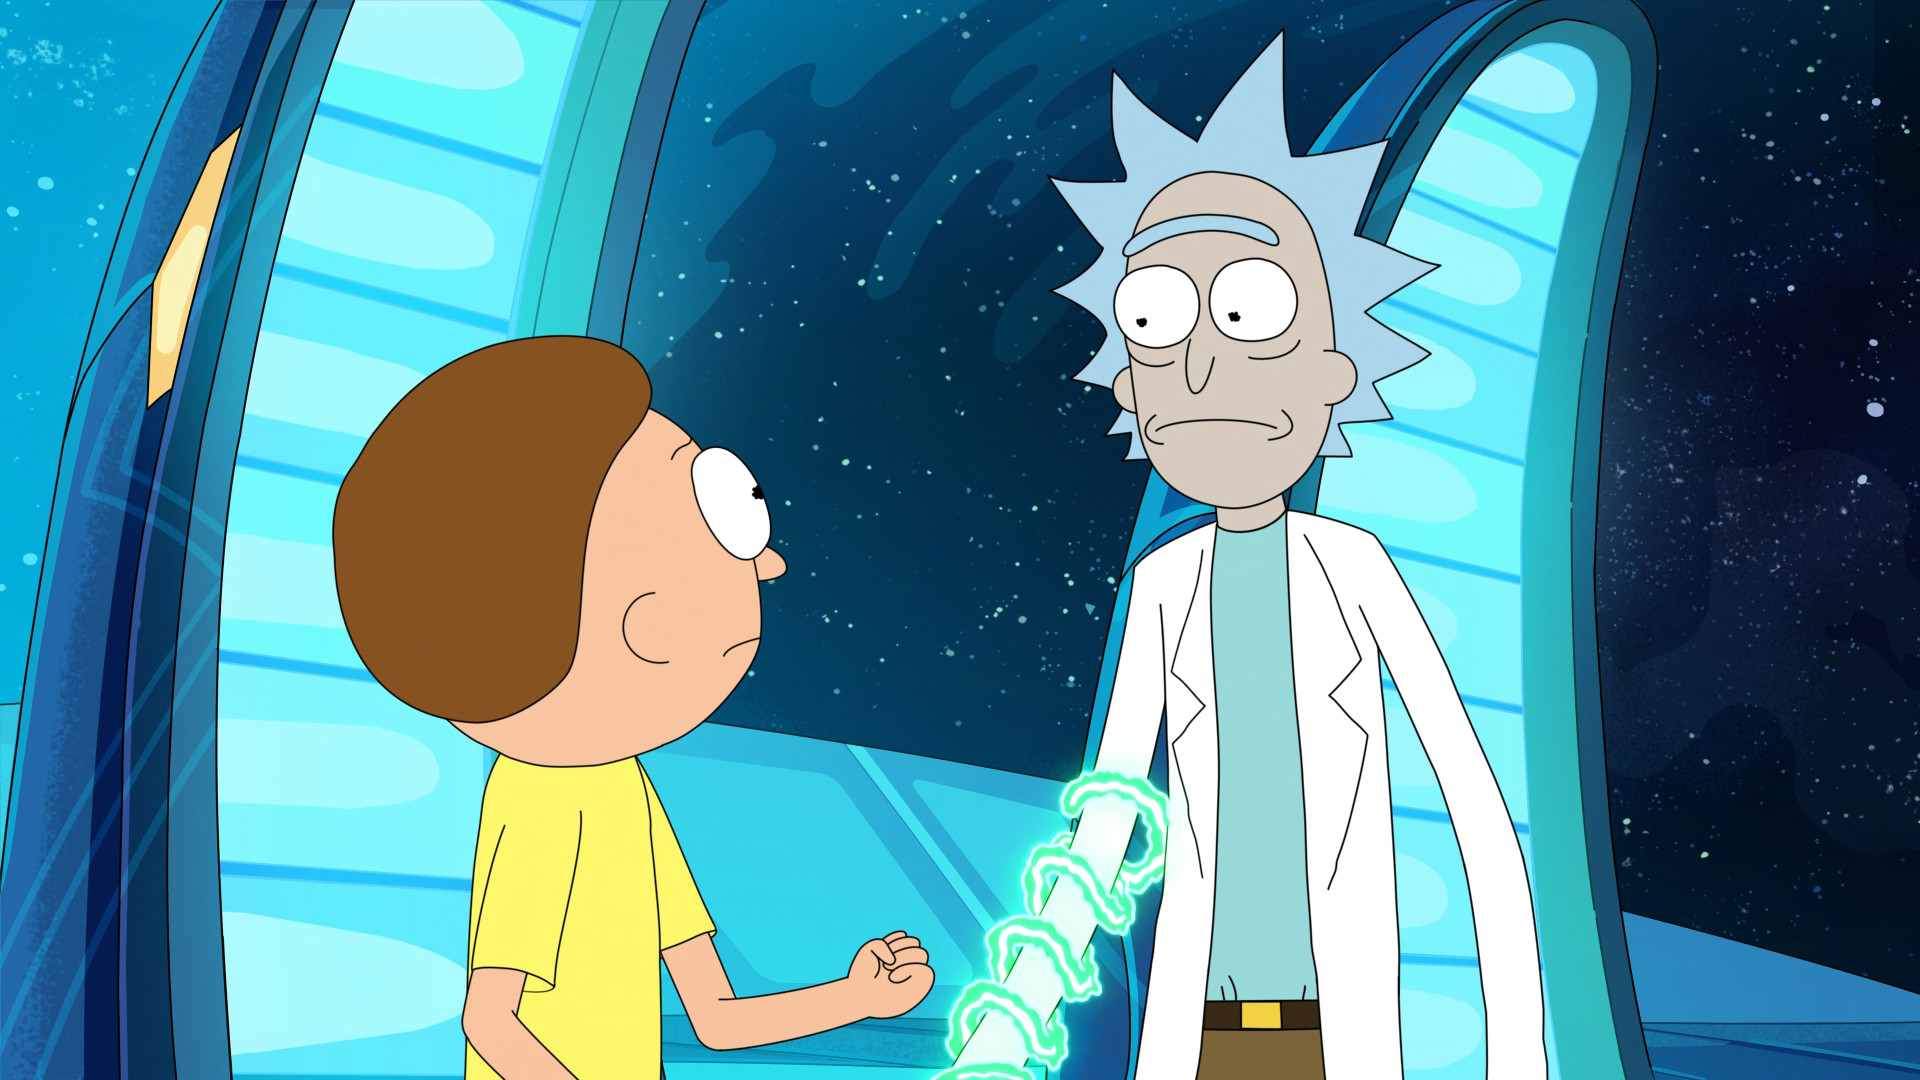 About Rick and morty Wallpaper HD 4K Google Play version   Apptopia